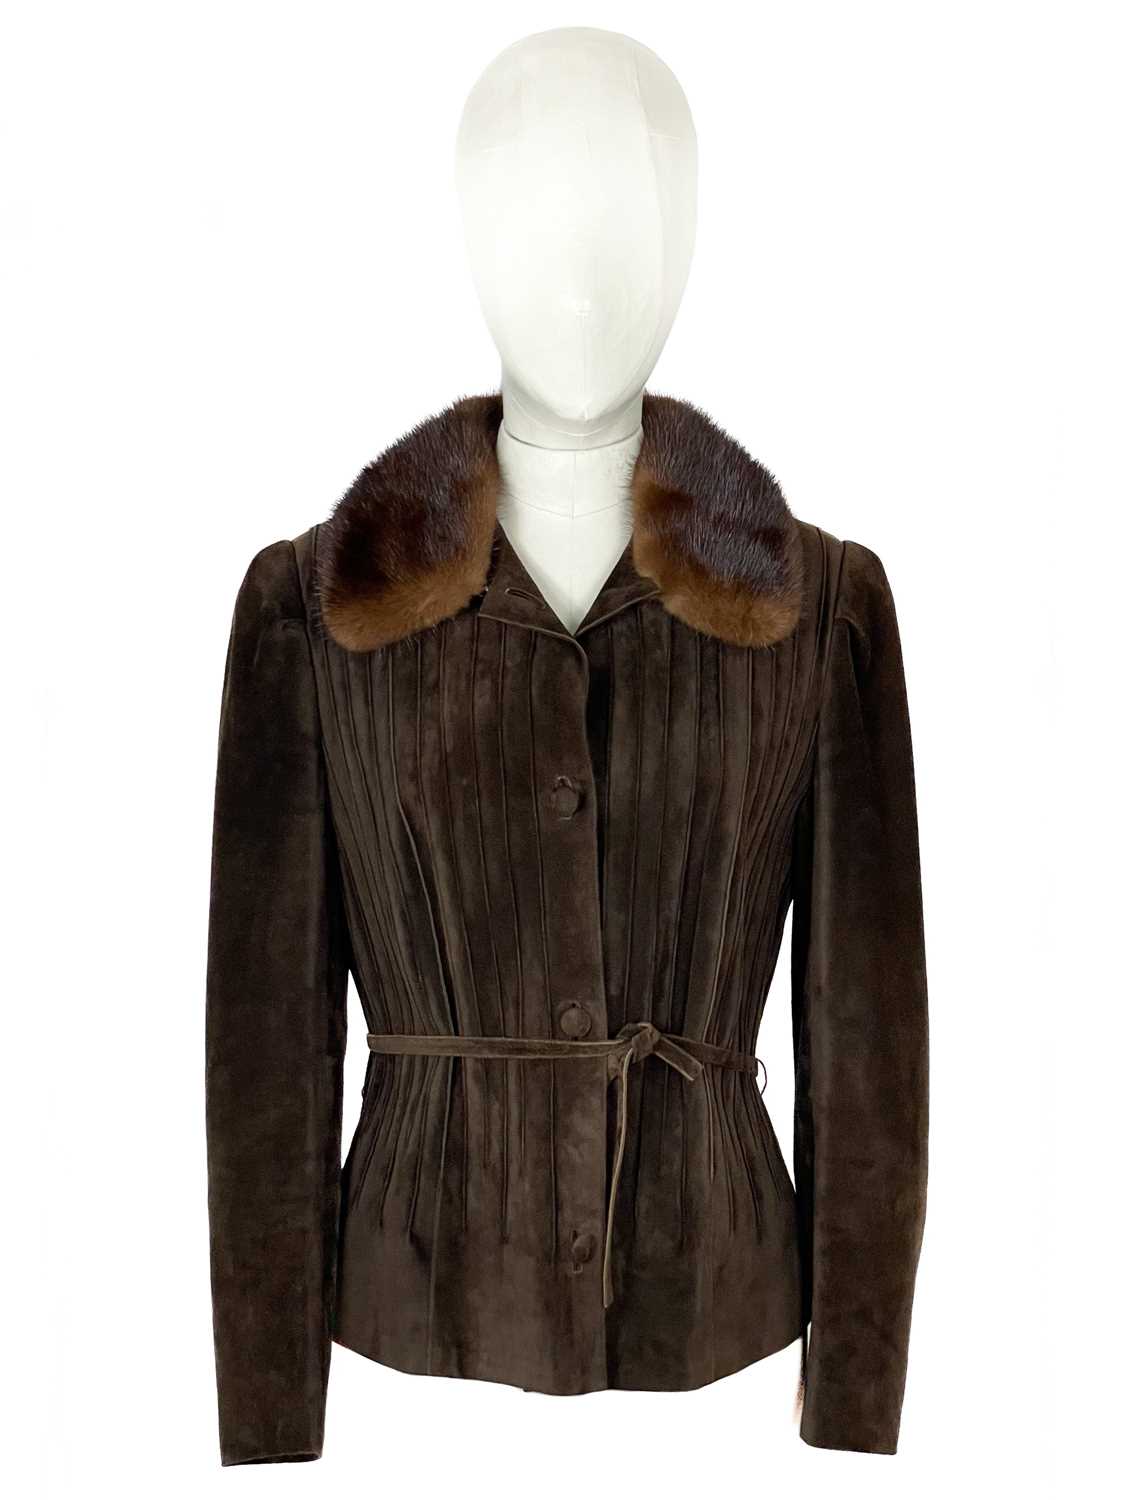 A Beltrami brown suede leather fitted jacket and skirt set. - Image 2 of 5